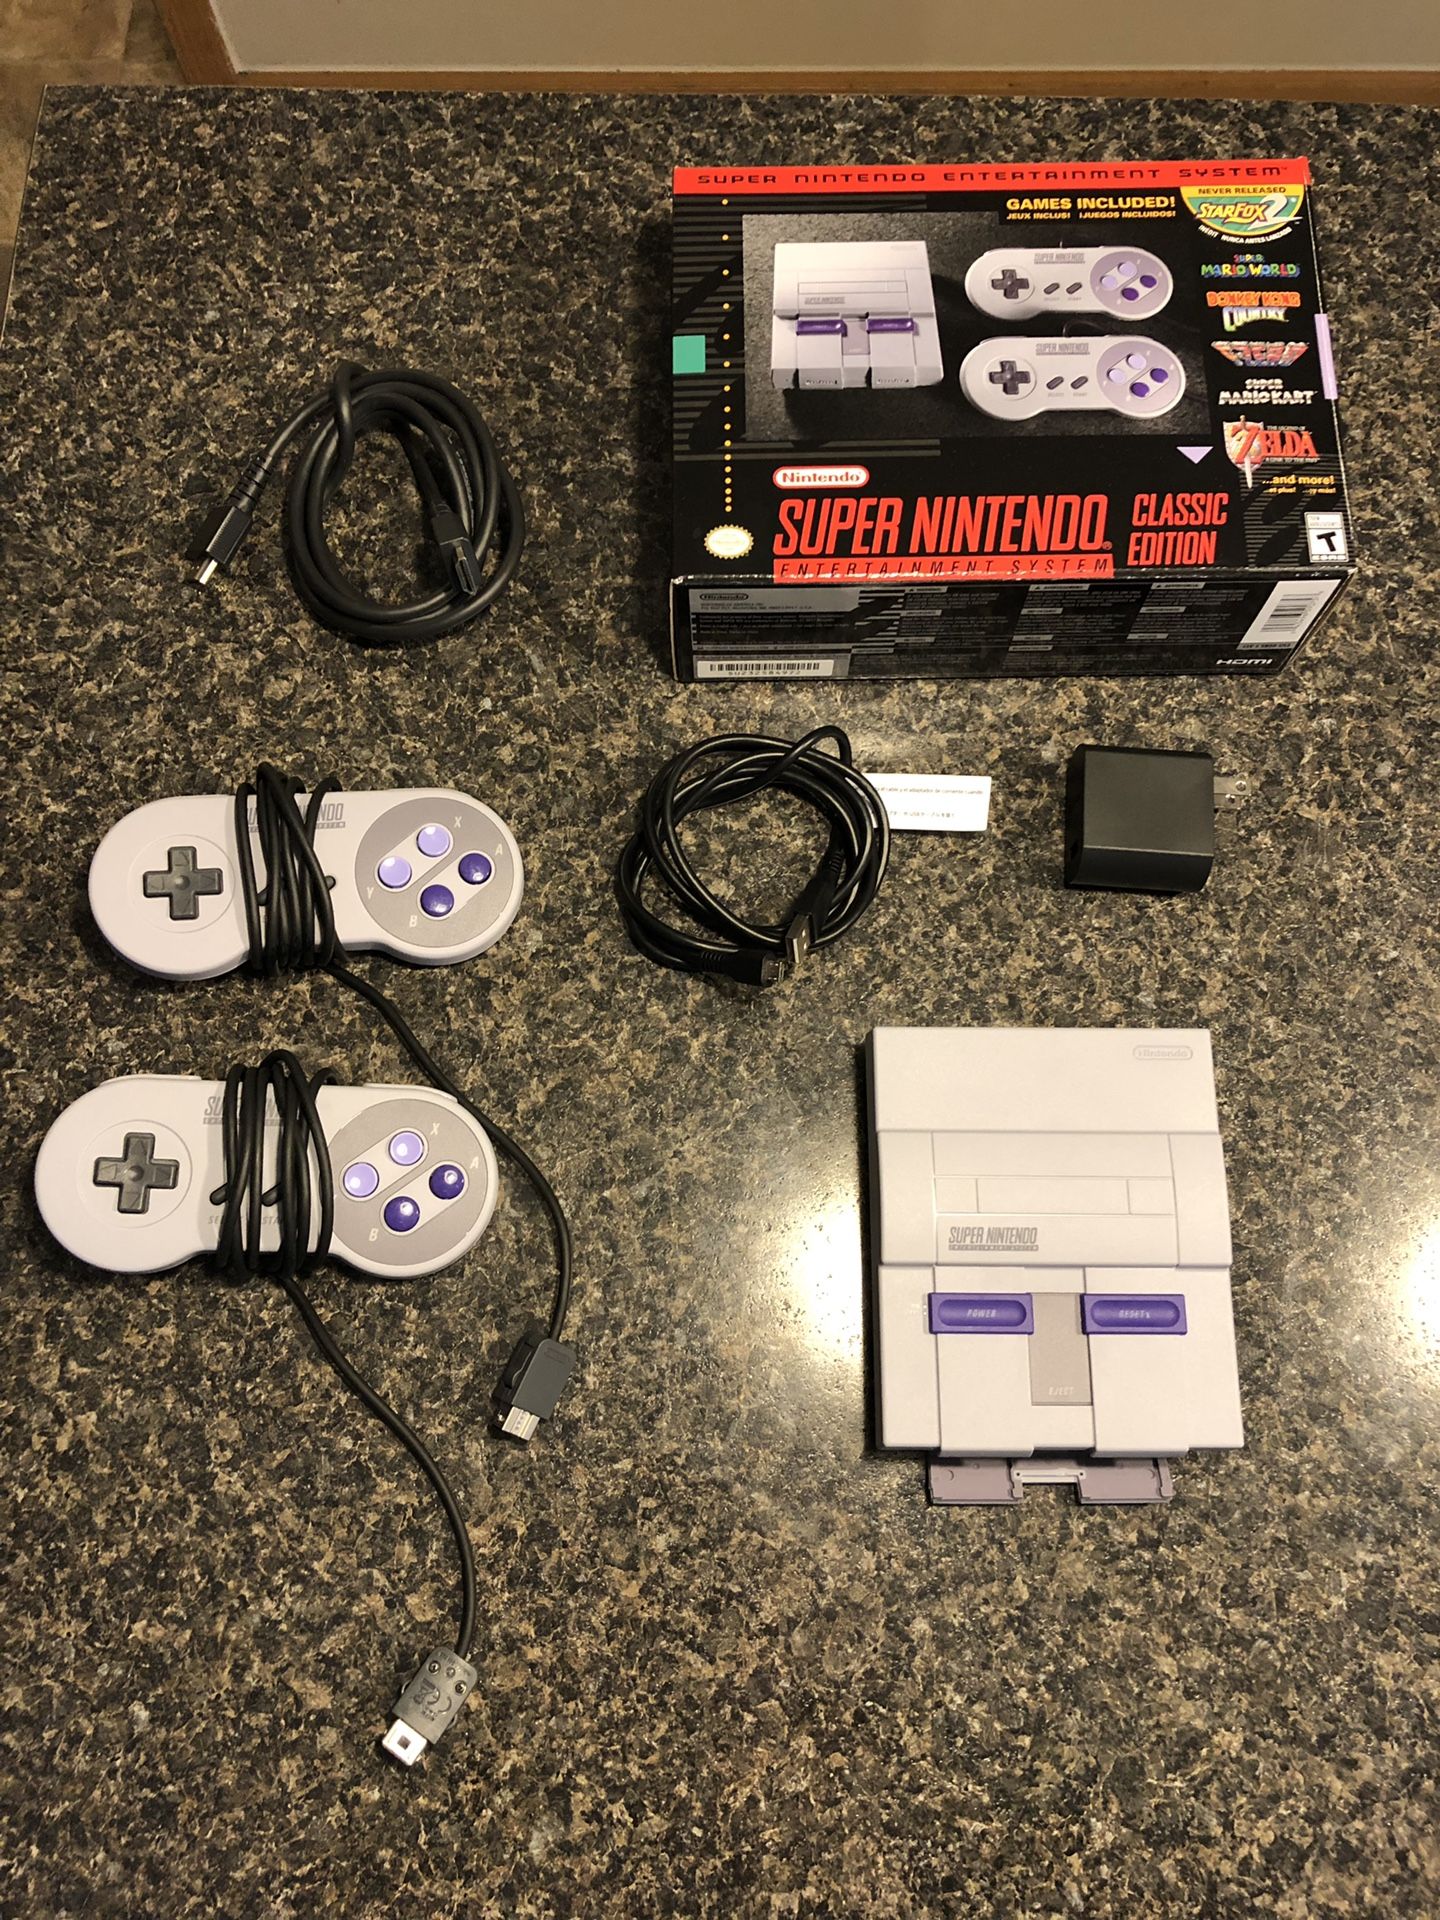 Super Nintendo Classic Edition - Only used once! - All original packaging included + HDMI cable. Dozens of pre-loaded SNES classic games!